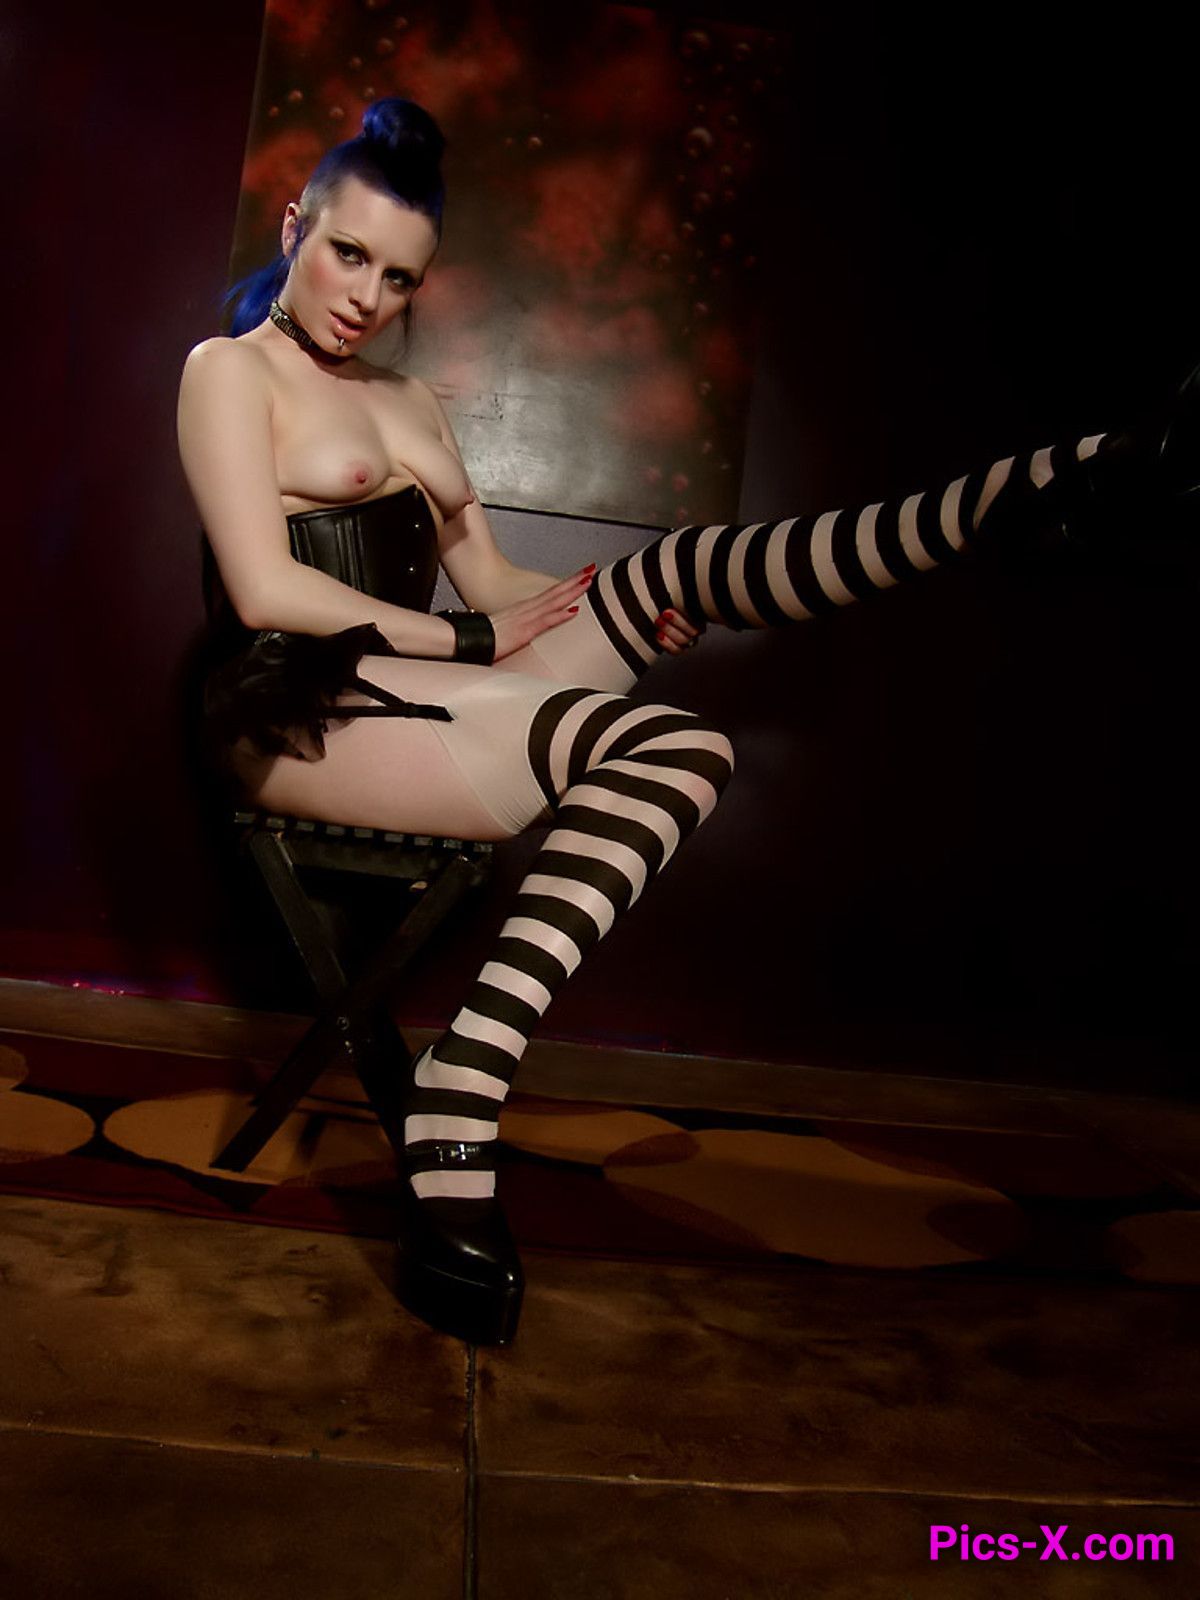 Sizzling hot gothic babe in striped stockings posing for you - Punk Rock Girlfriend - Image 55